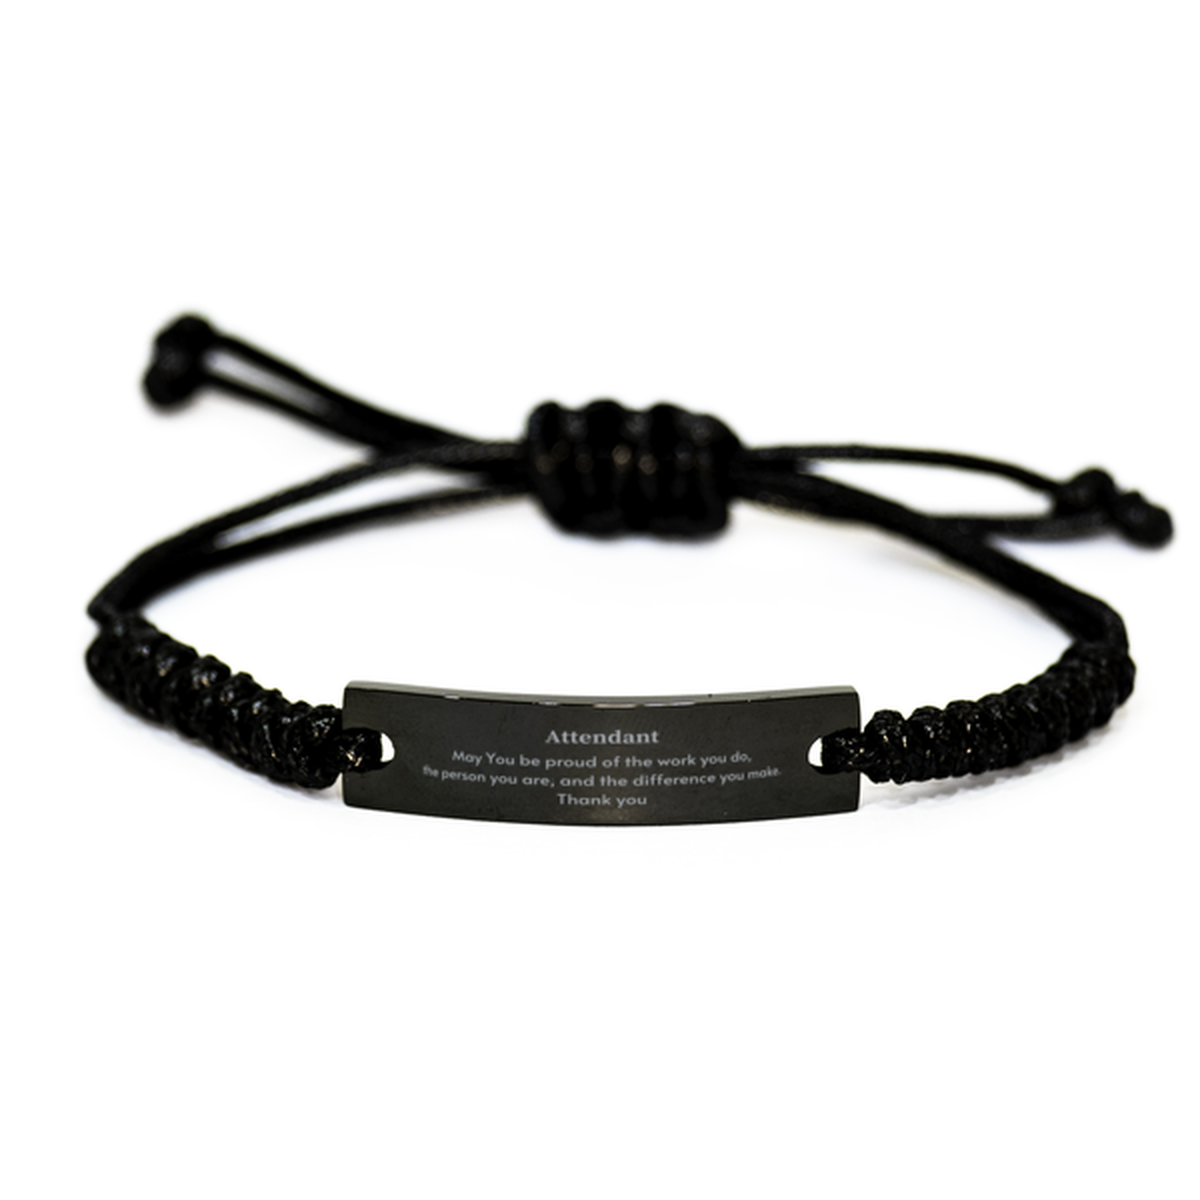 Heartwarming Black Rope Bracelet Retirement Coworkers Gifts for Attendant, Attendant May You be proud of the work you do, the person you are Gifts for Boss Men Women Friends